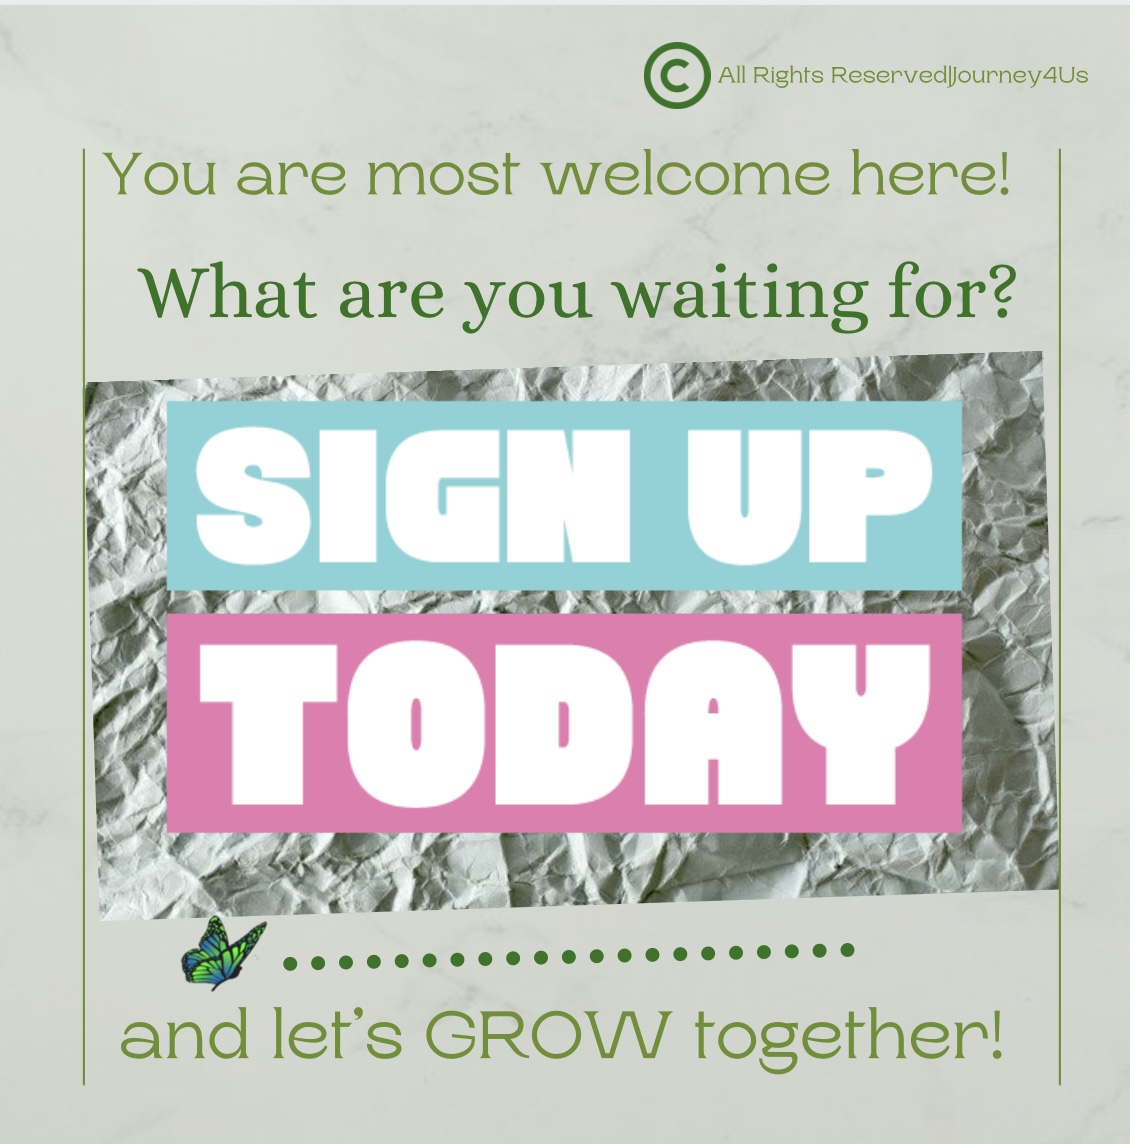 journey4us community sign up today